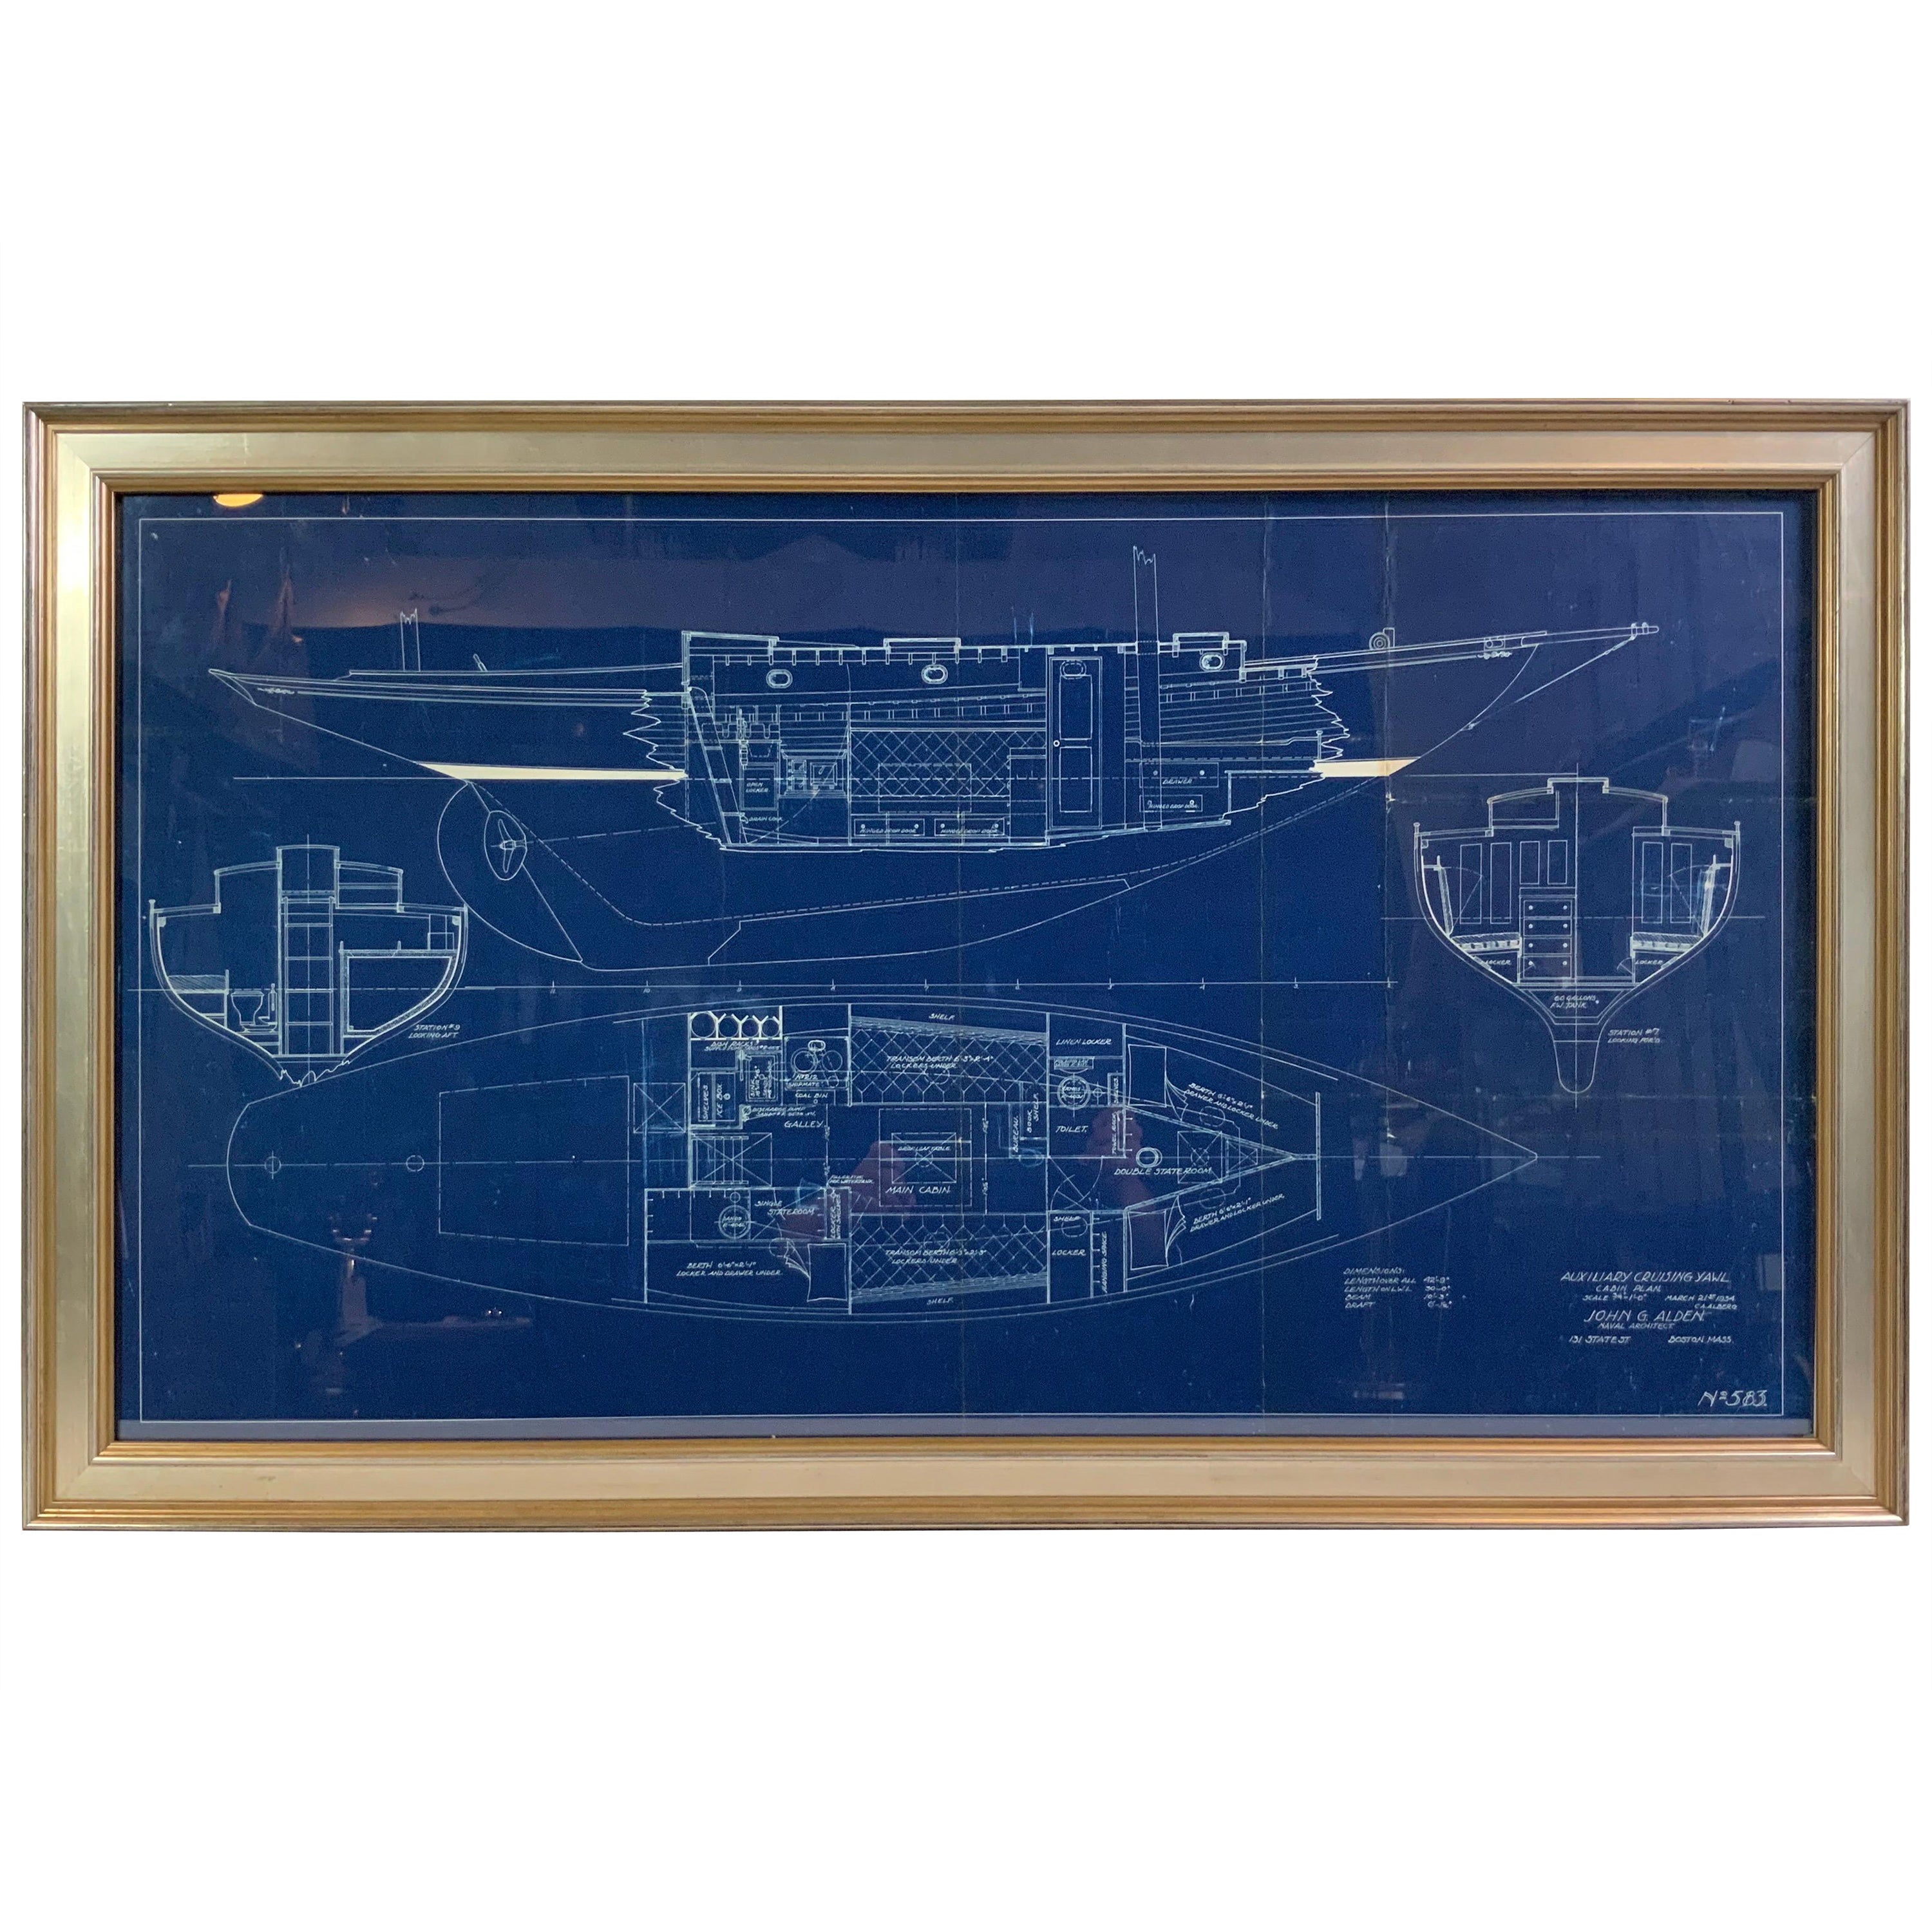 John Alden Blueprint No. 583 of an Auxiliary Cruising Yawl For Sale